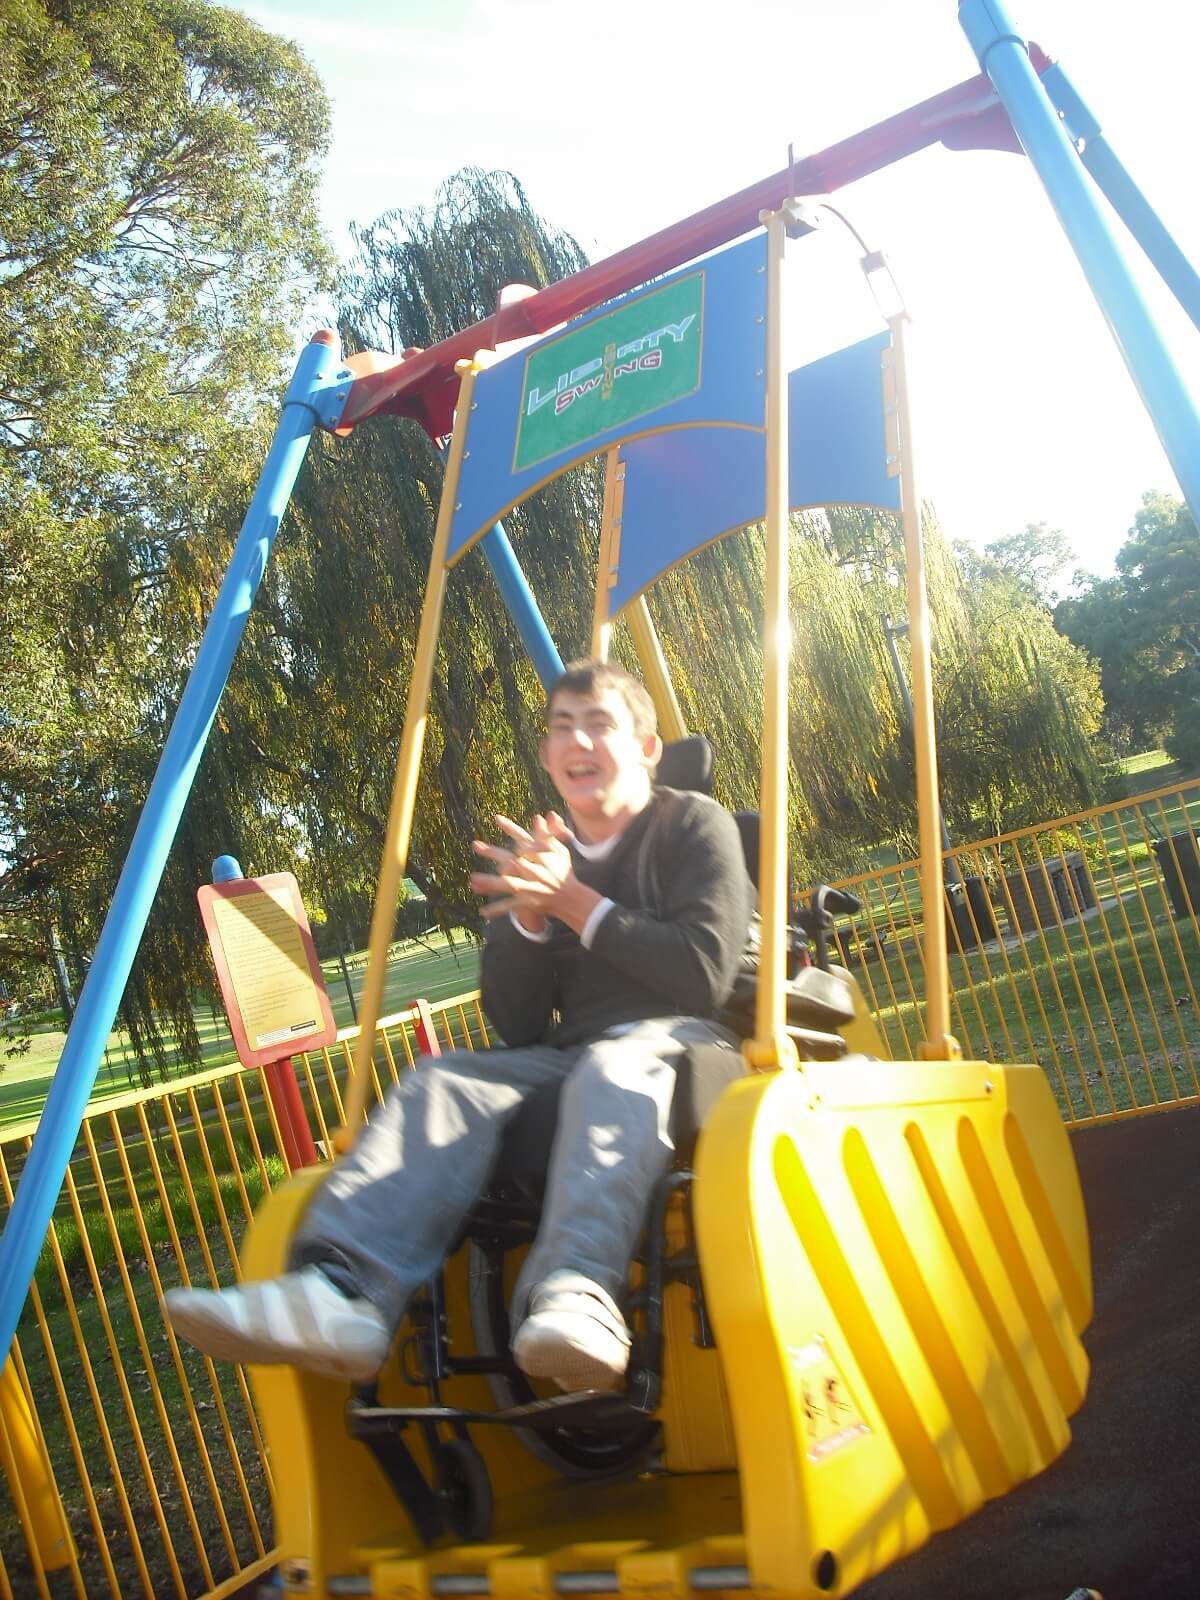 A person clapping while using the Liberty Swing located at Stirk Park in Kalamunda